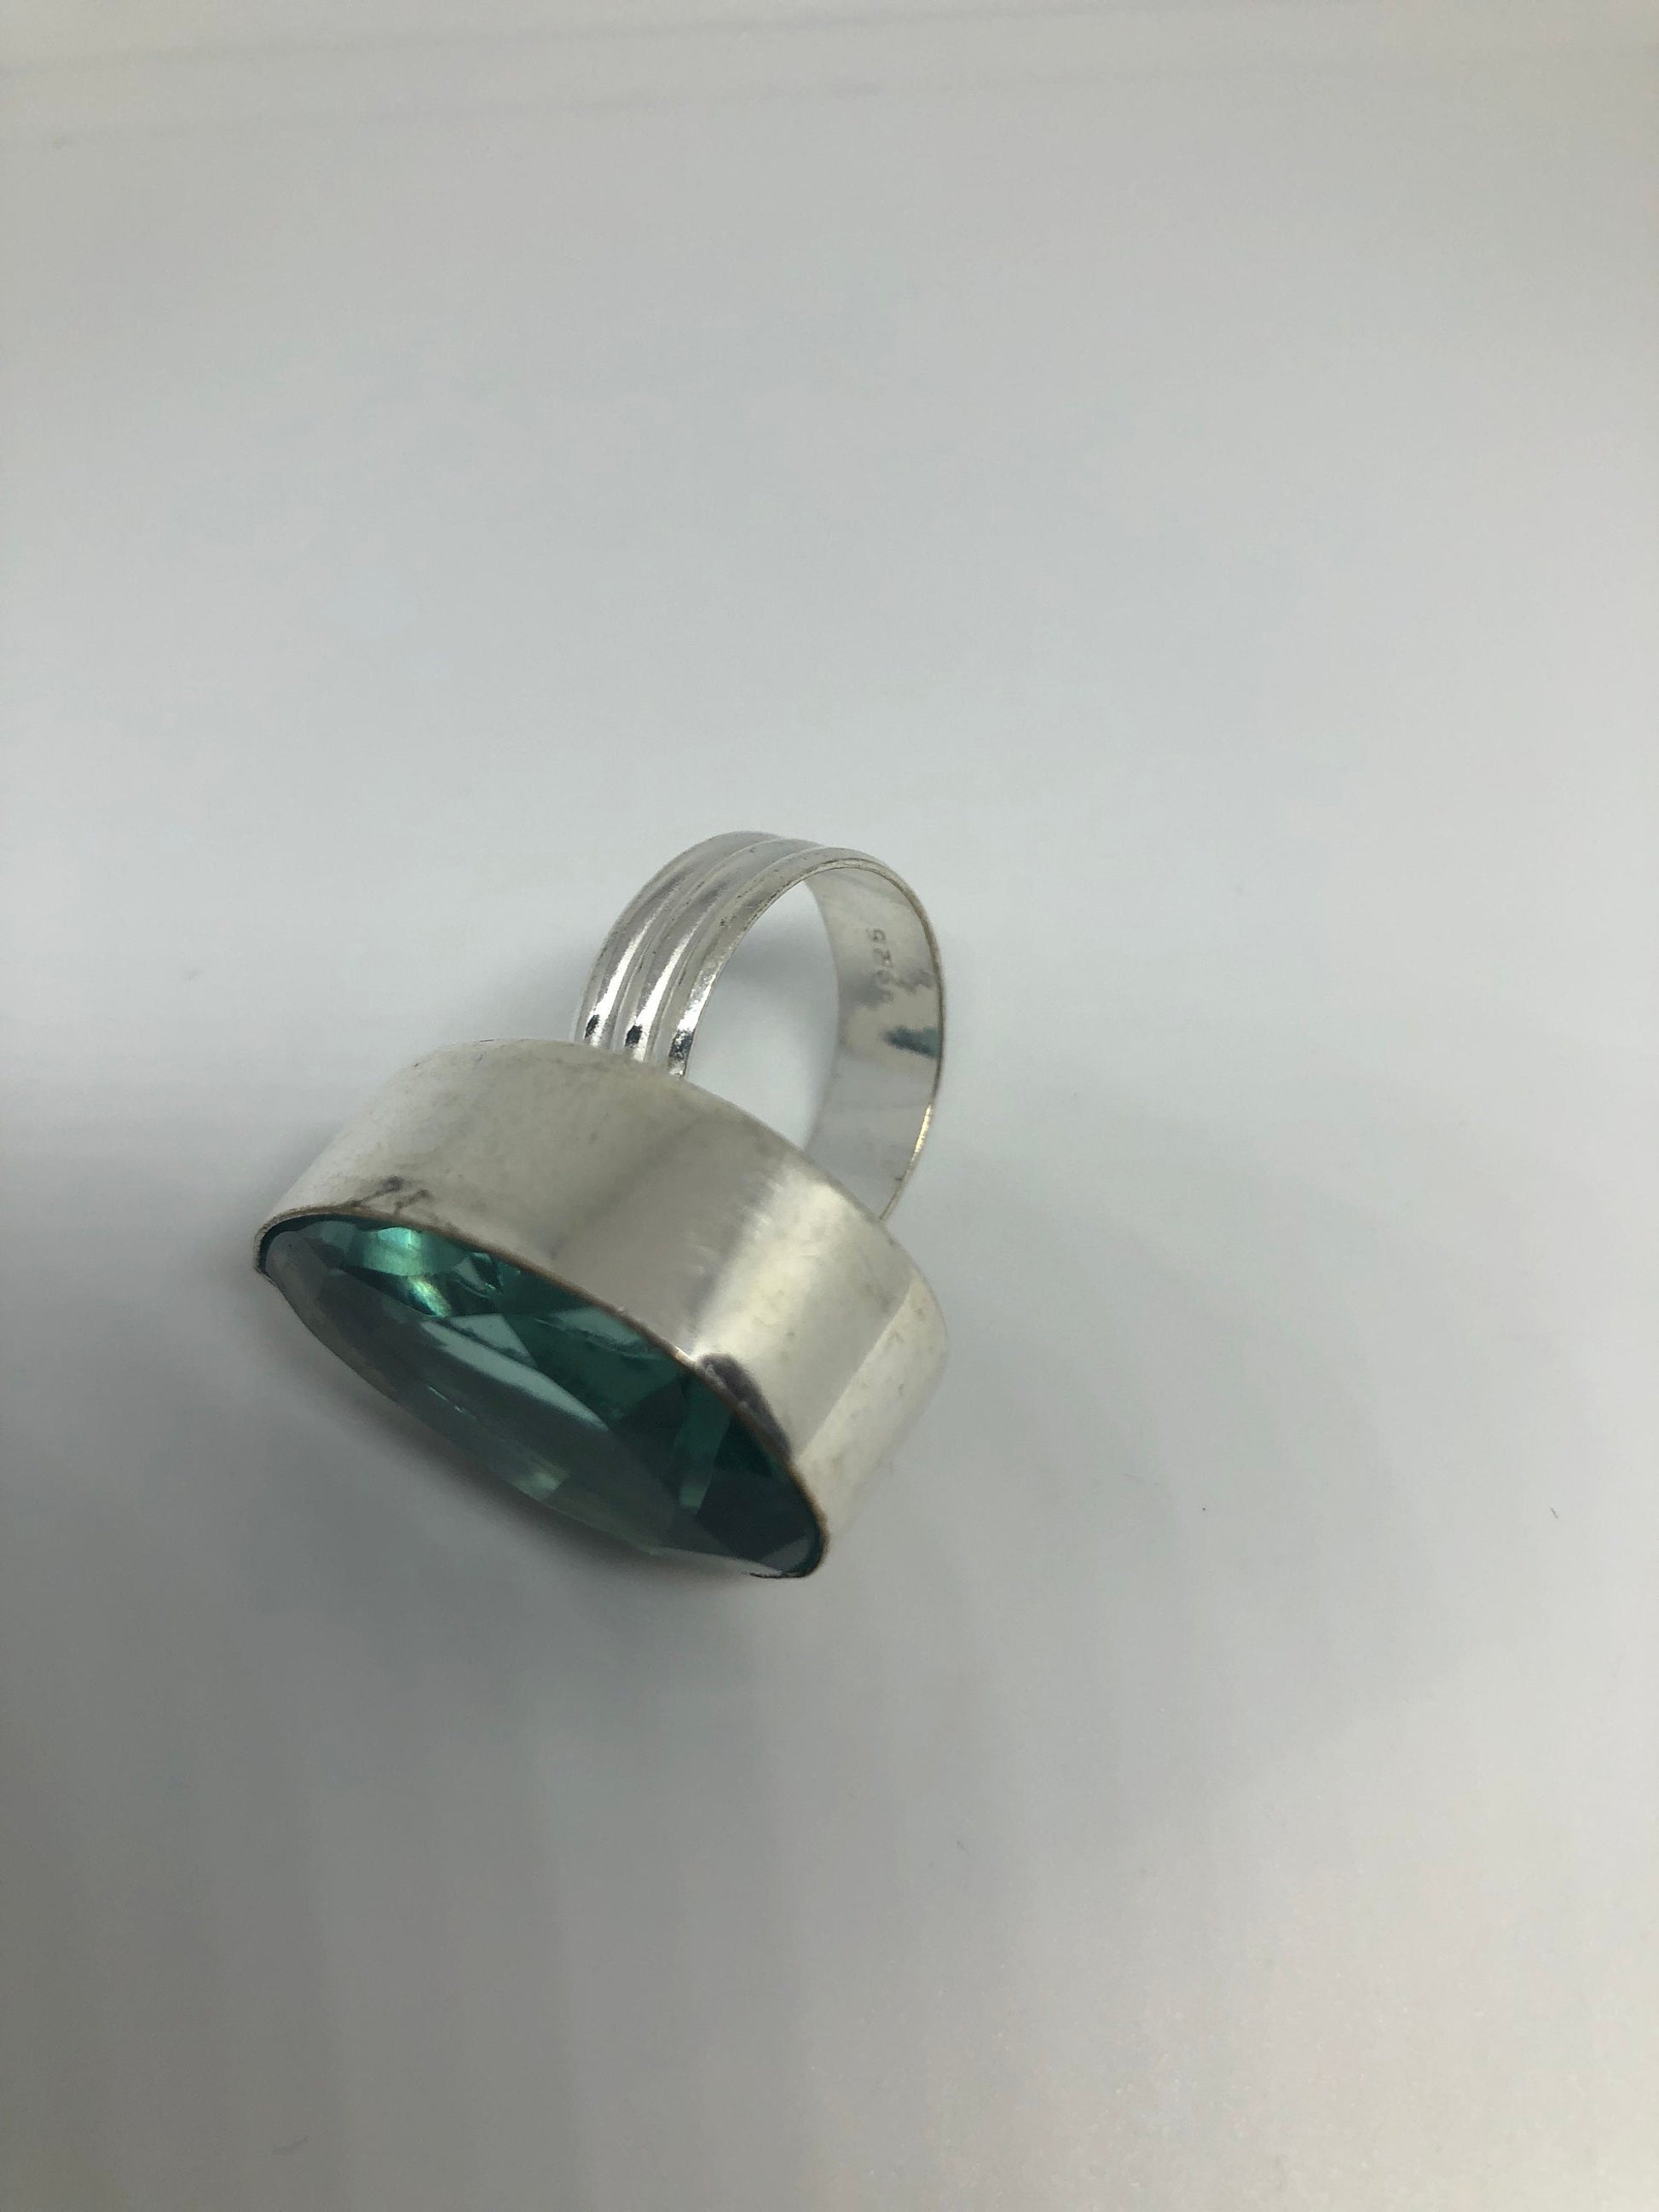 Vintage Aqua Vintage Art Glass Ring About an Inch Long Knuckle Ring